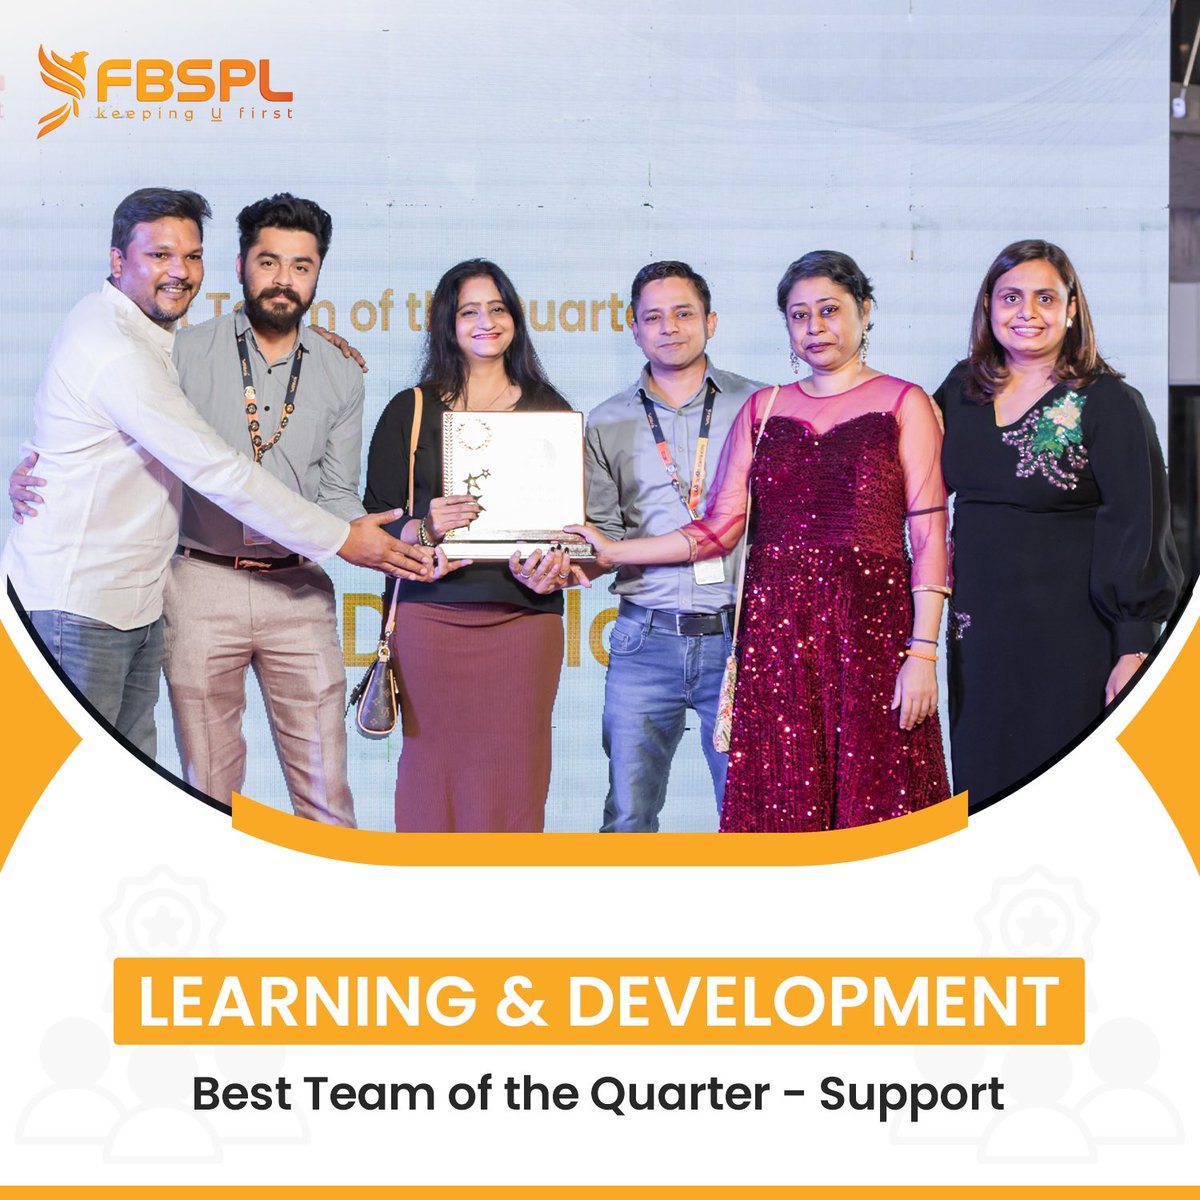 A good team helps us go above and beyond, and team spirit makes everything happen. 

Heartiest congratulations to our Best Team of the Quarter - Team Learning & Development.
 
#FBSPL #bestteam #teamofthequarter #teamspirit #keepingUfirst #FBSPLteam #rewards #awards #townhall